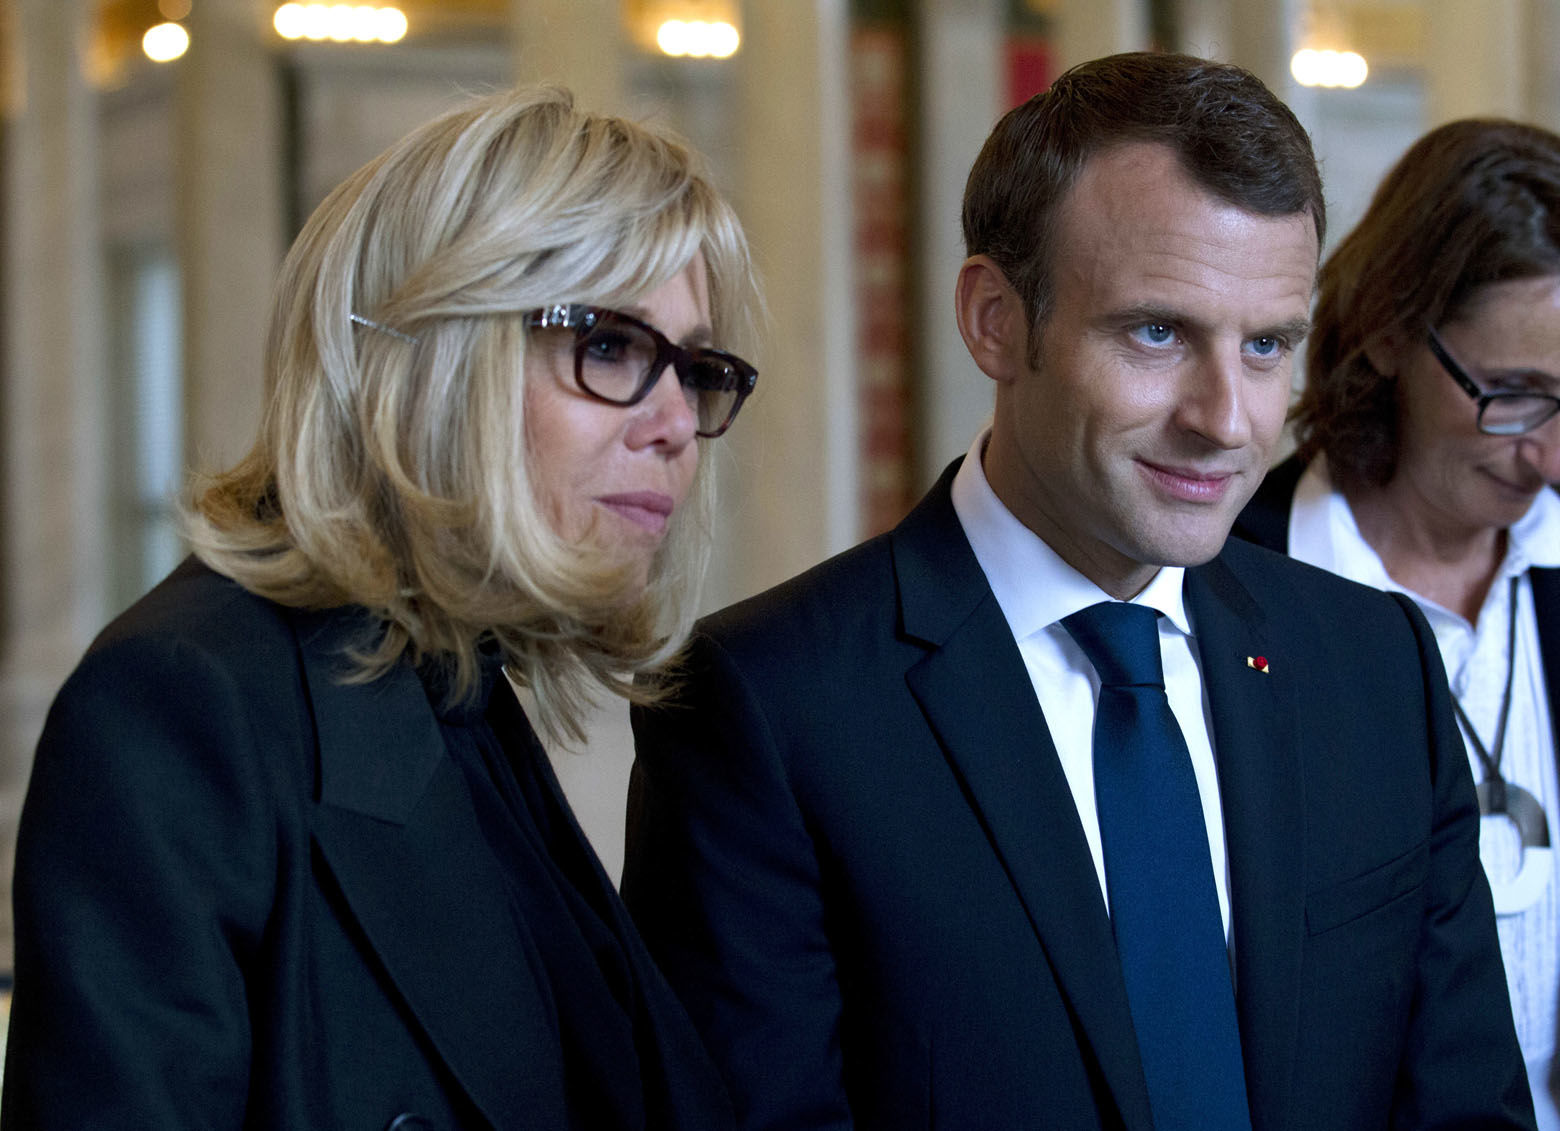 French President Emmanuel Macron and his wife Brigitte Macron speak with historians and curators after their visit to the Library of Congress on Wednesday, April 25, 2018, in Washington.  ( AP Photo/Jose Luis Magana)